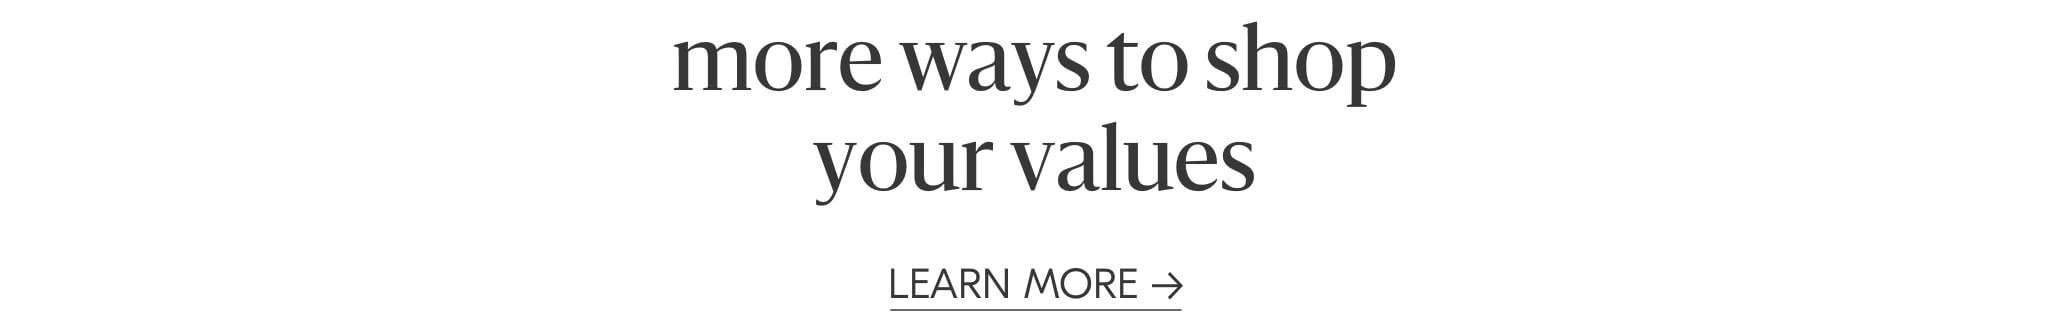 more ways to shop your values